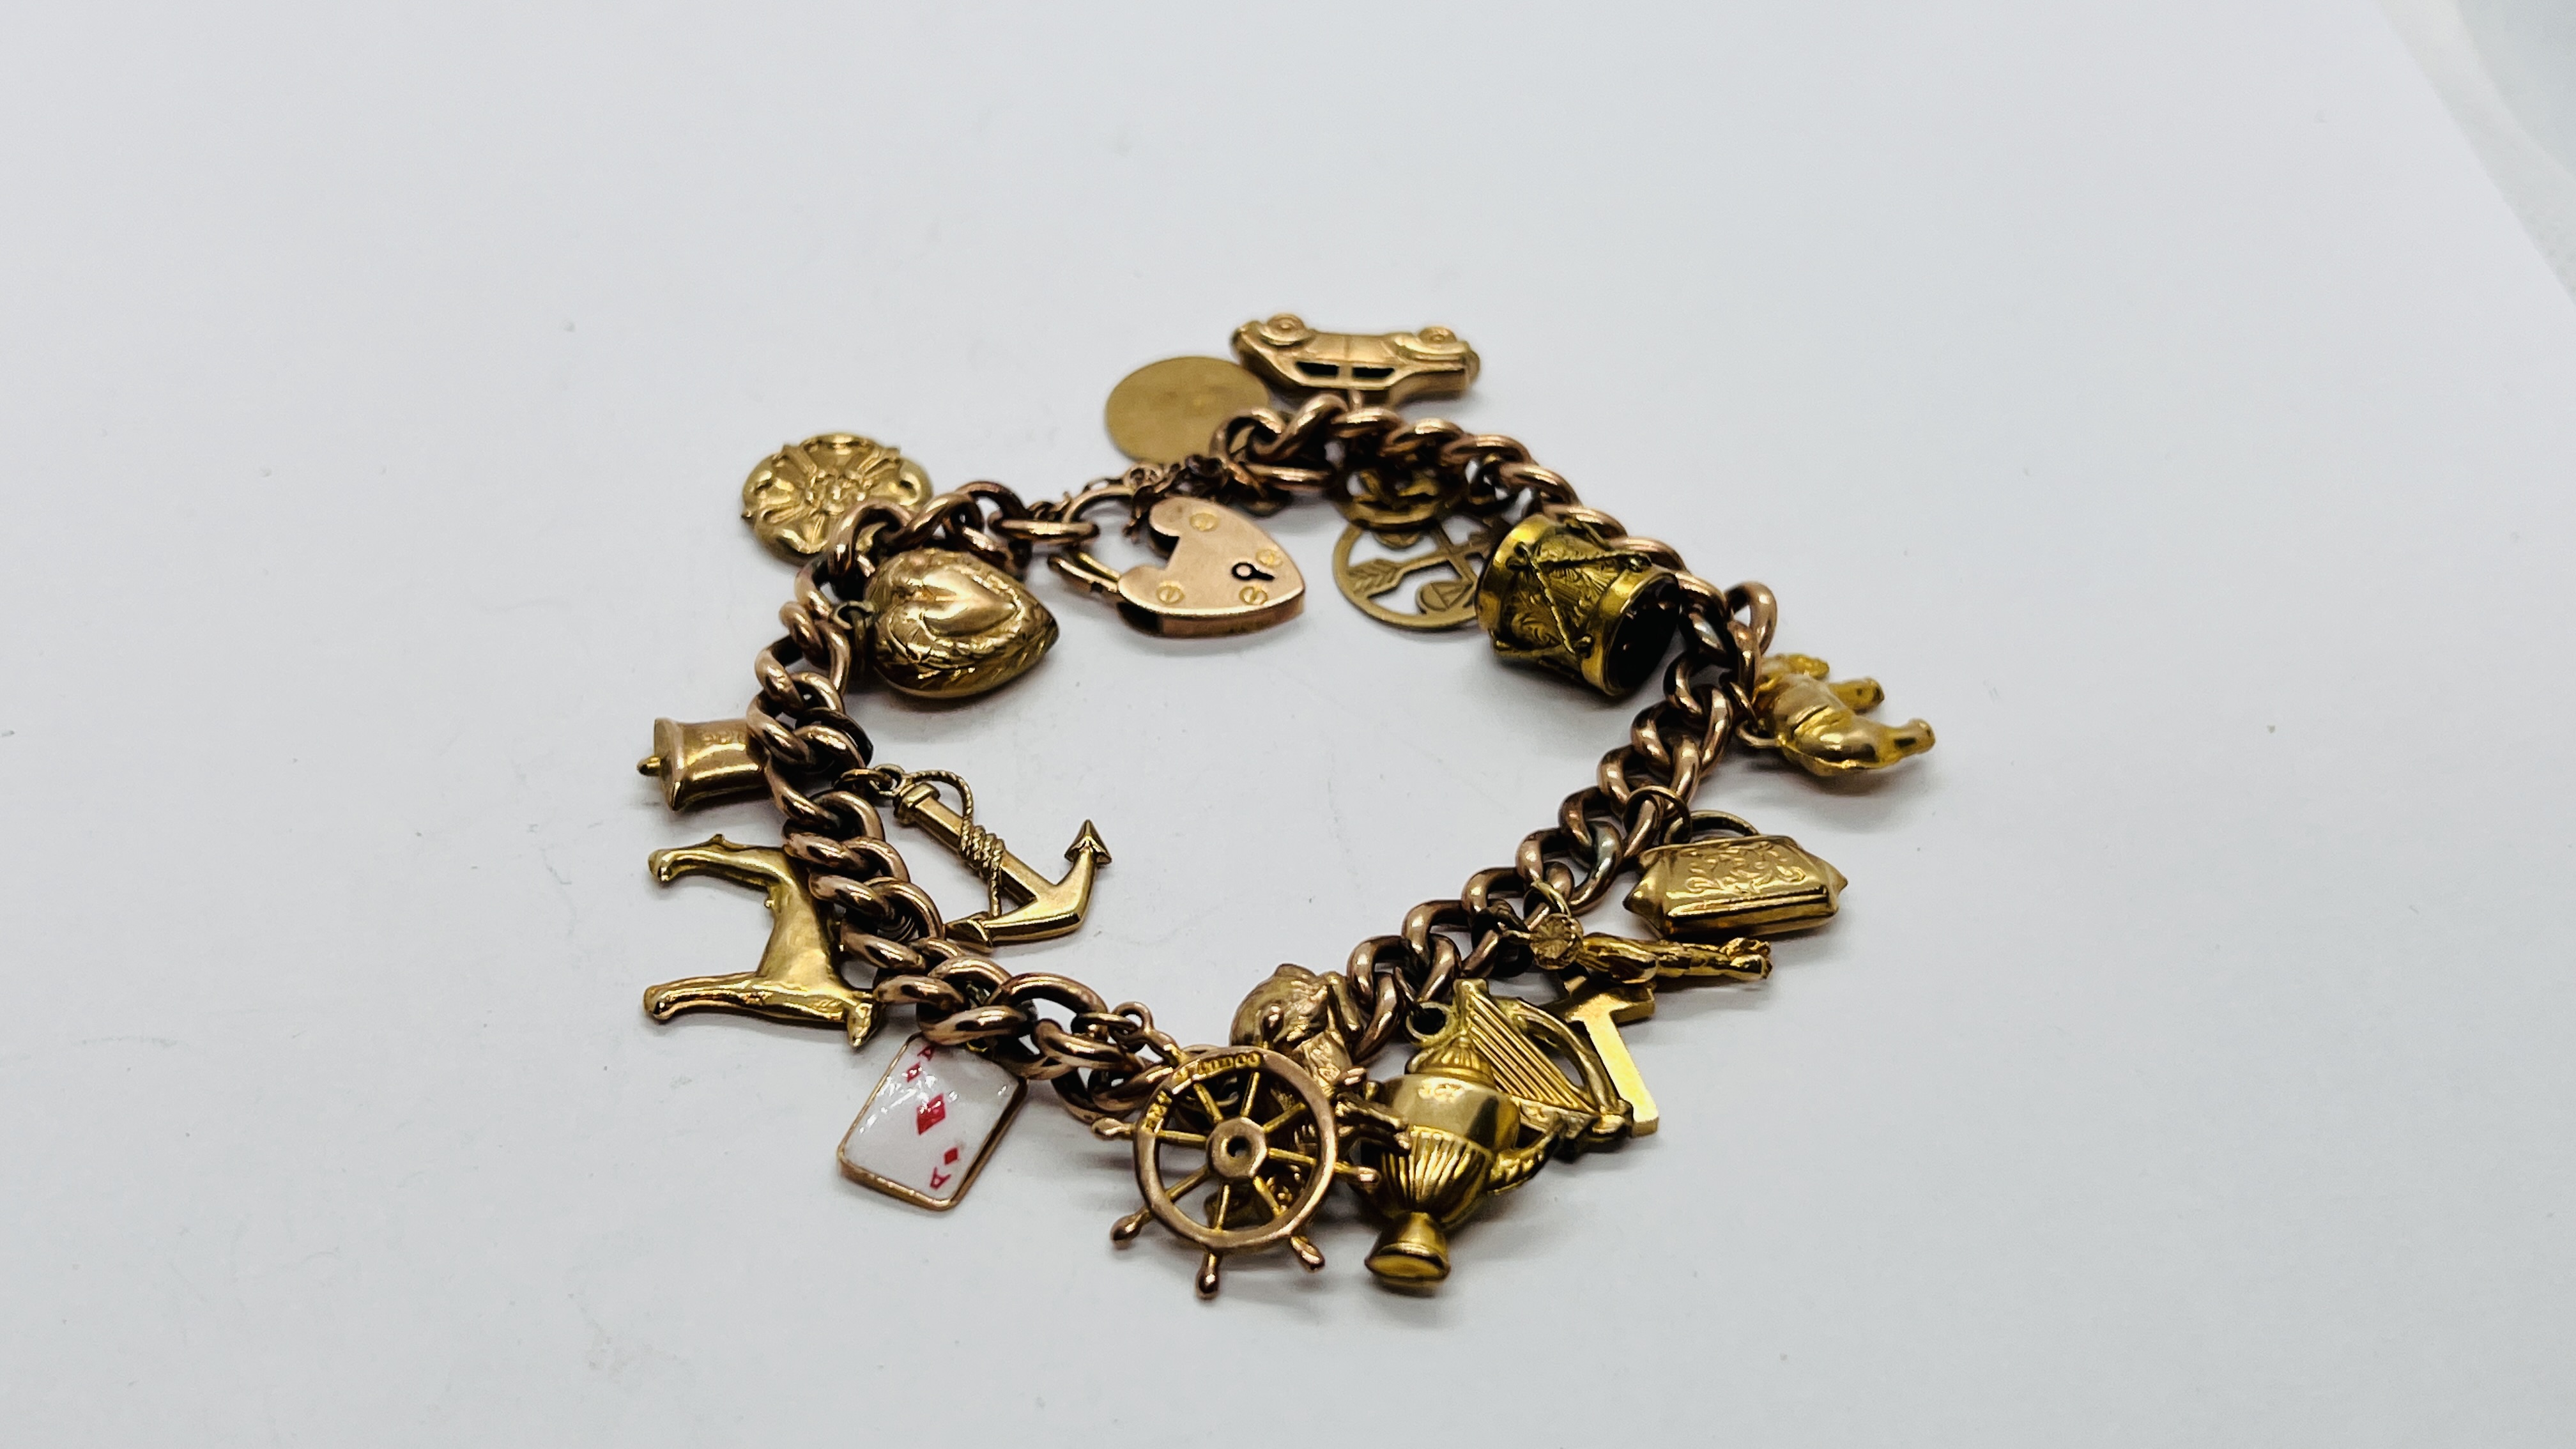 A 9CT GOLD CHARM BRACELET WITH SAFETY CHAIN AND PADLOCK CLASP ALONG WITH 18 9CT CHARMS AND A